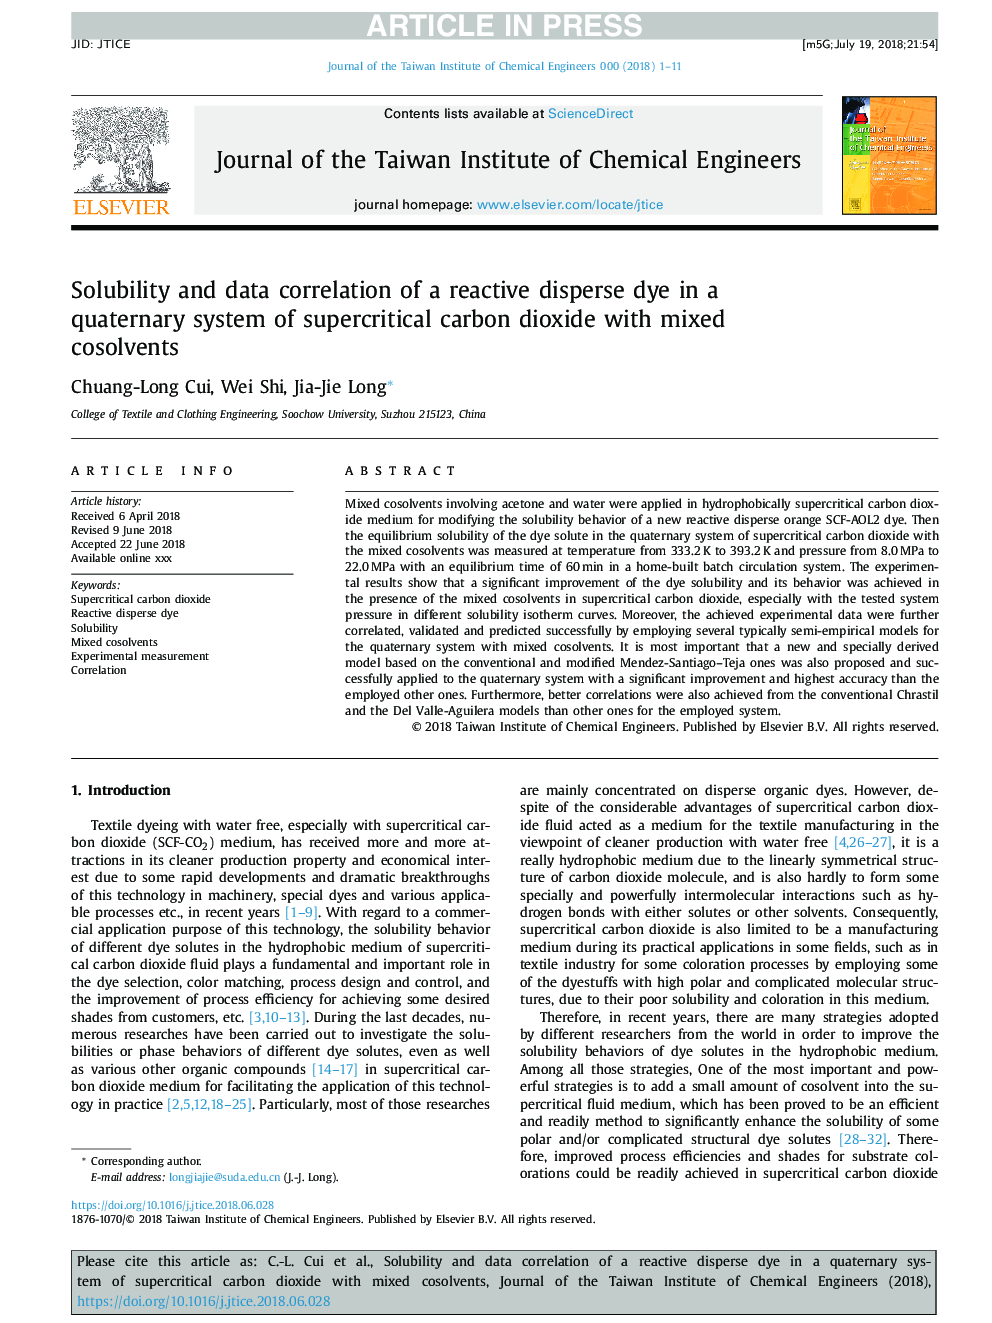 Solubility and data correlation of a reactive disperse dye in a quaternary system of supercritical carbon dioxide with mixed cosolvents